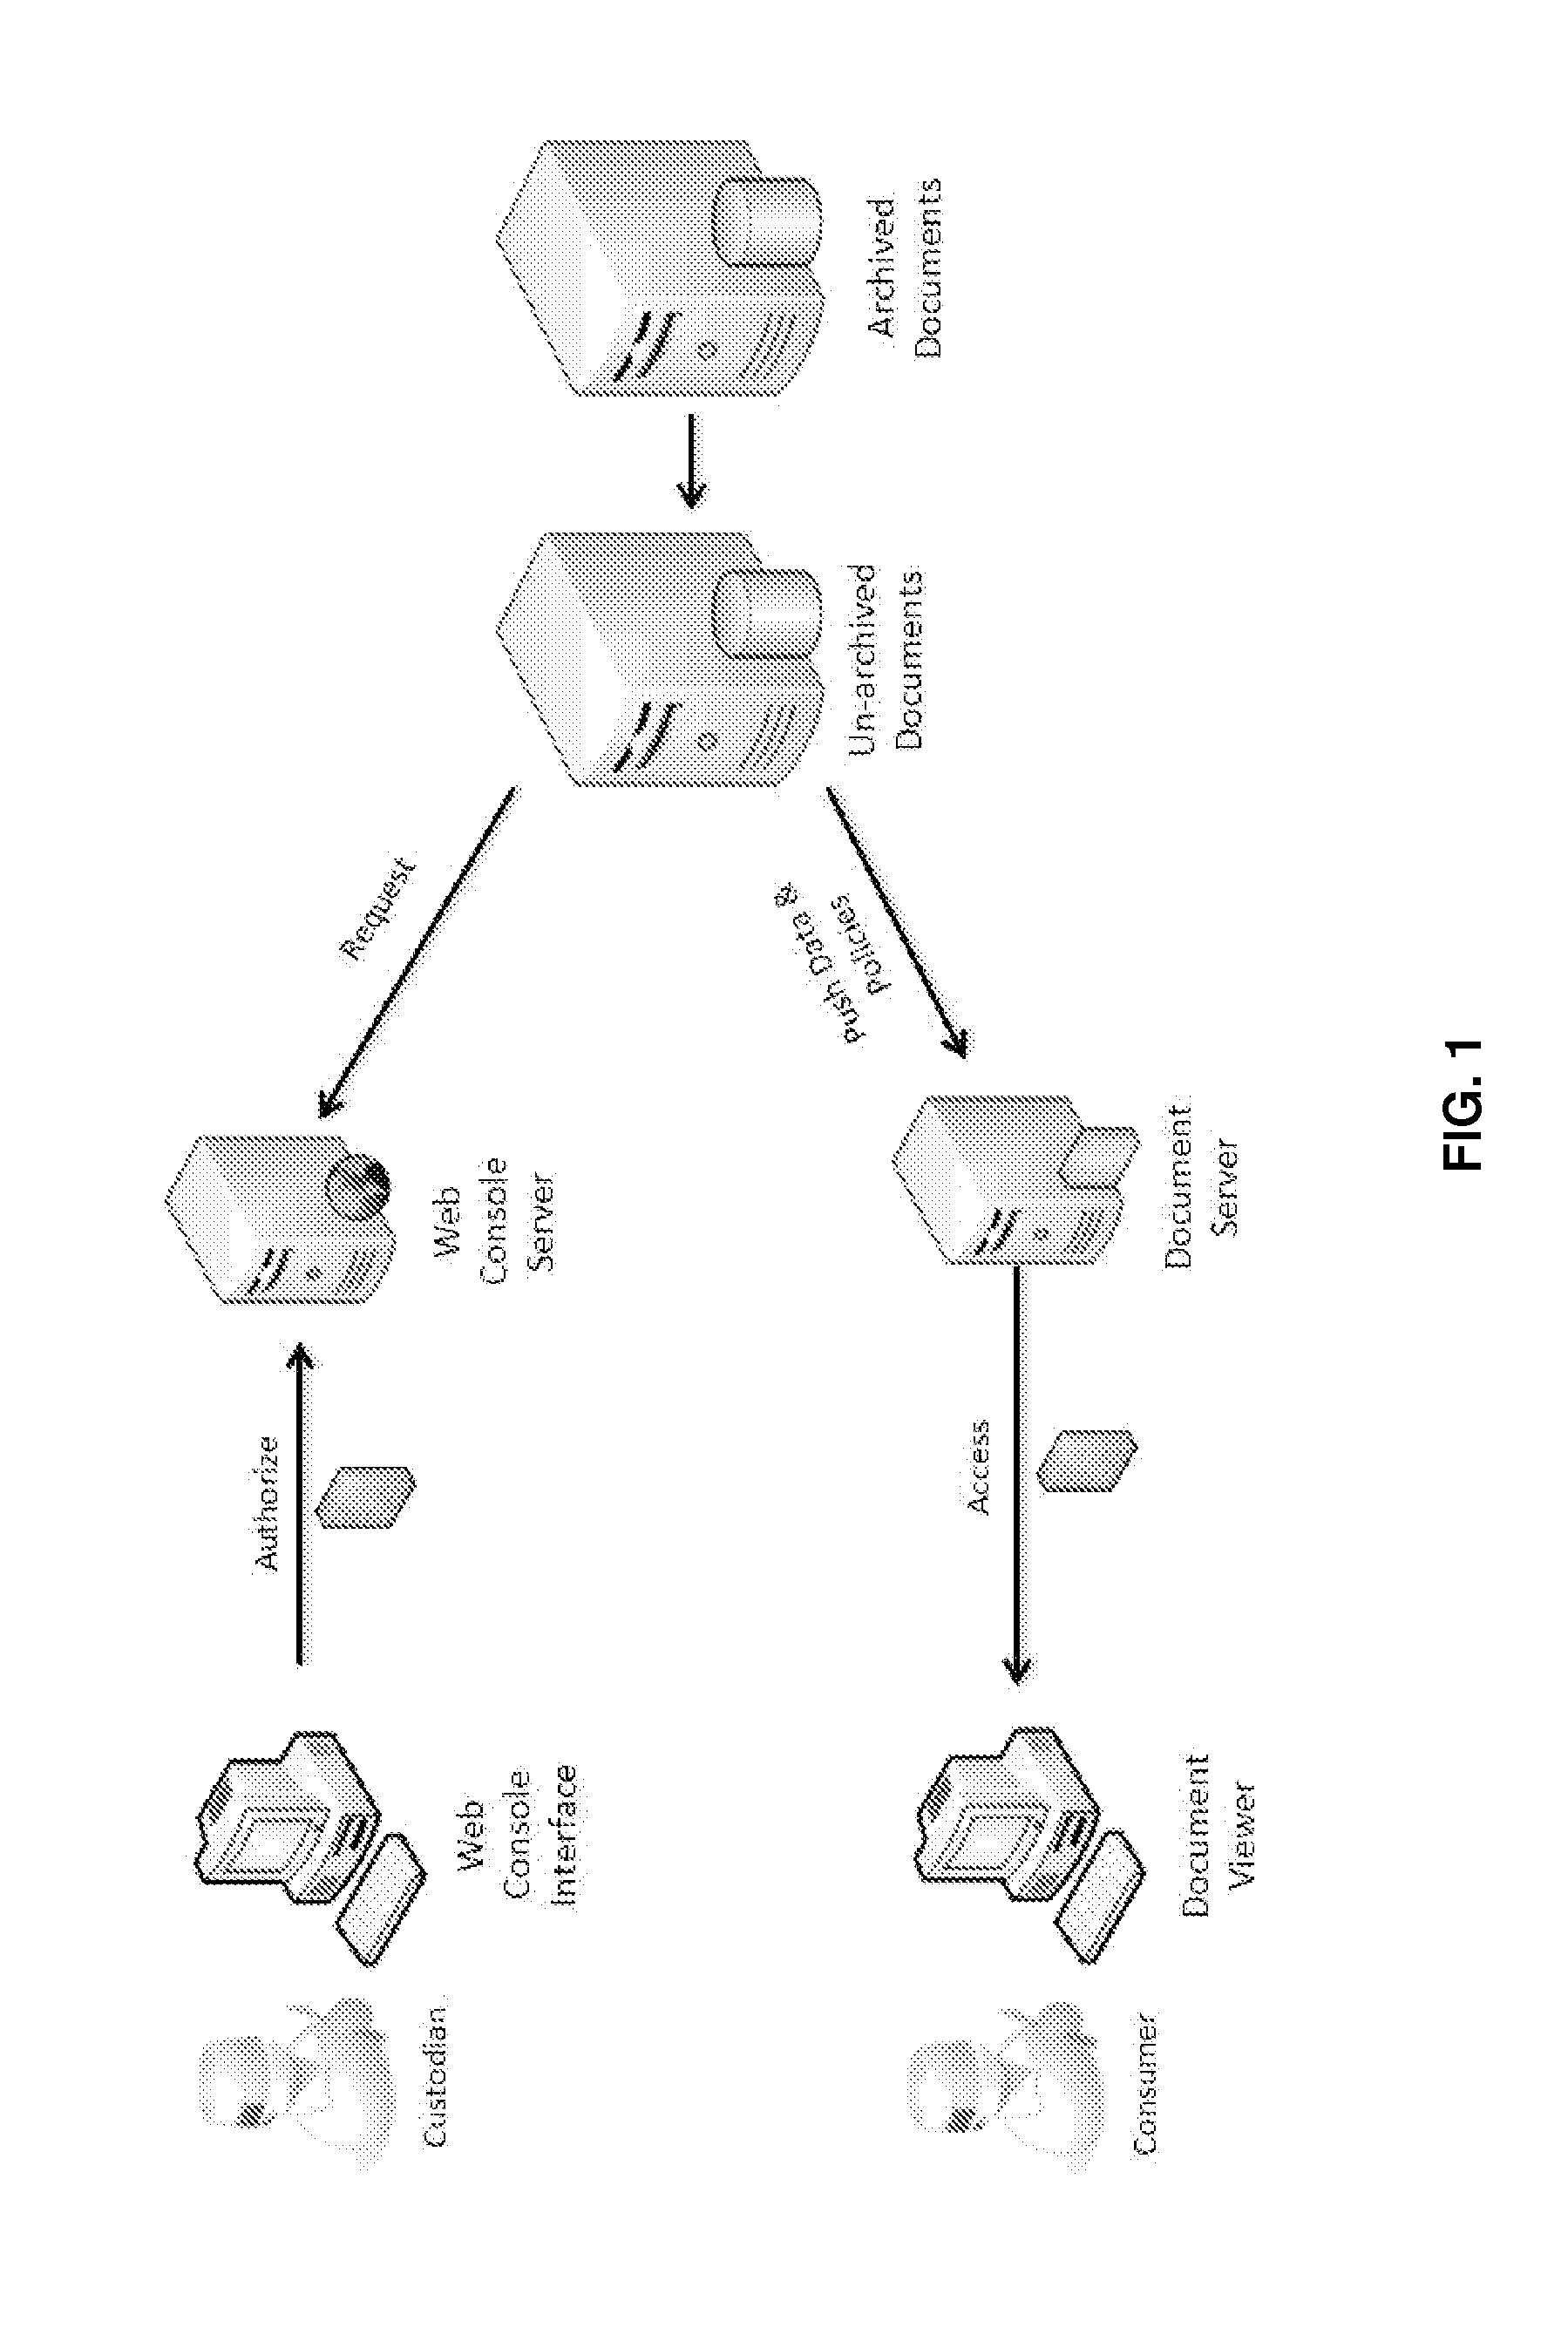 Secure Storage System and Uses Thereof